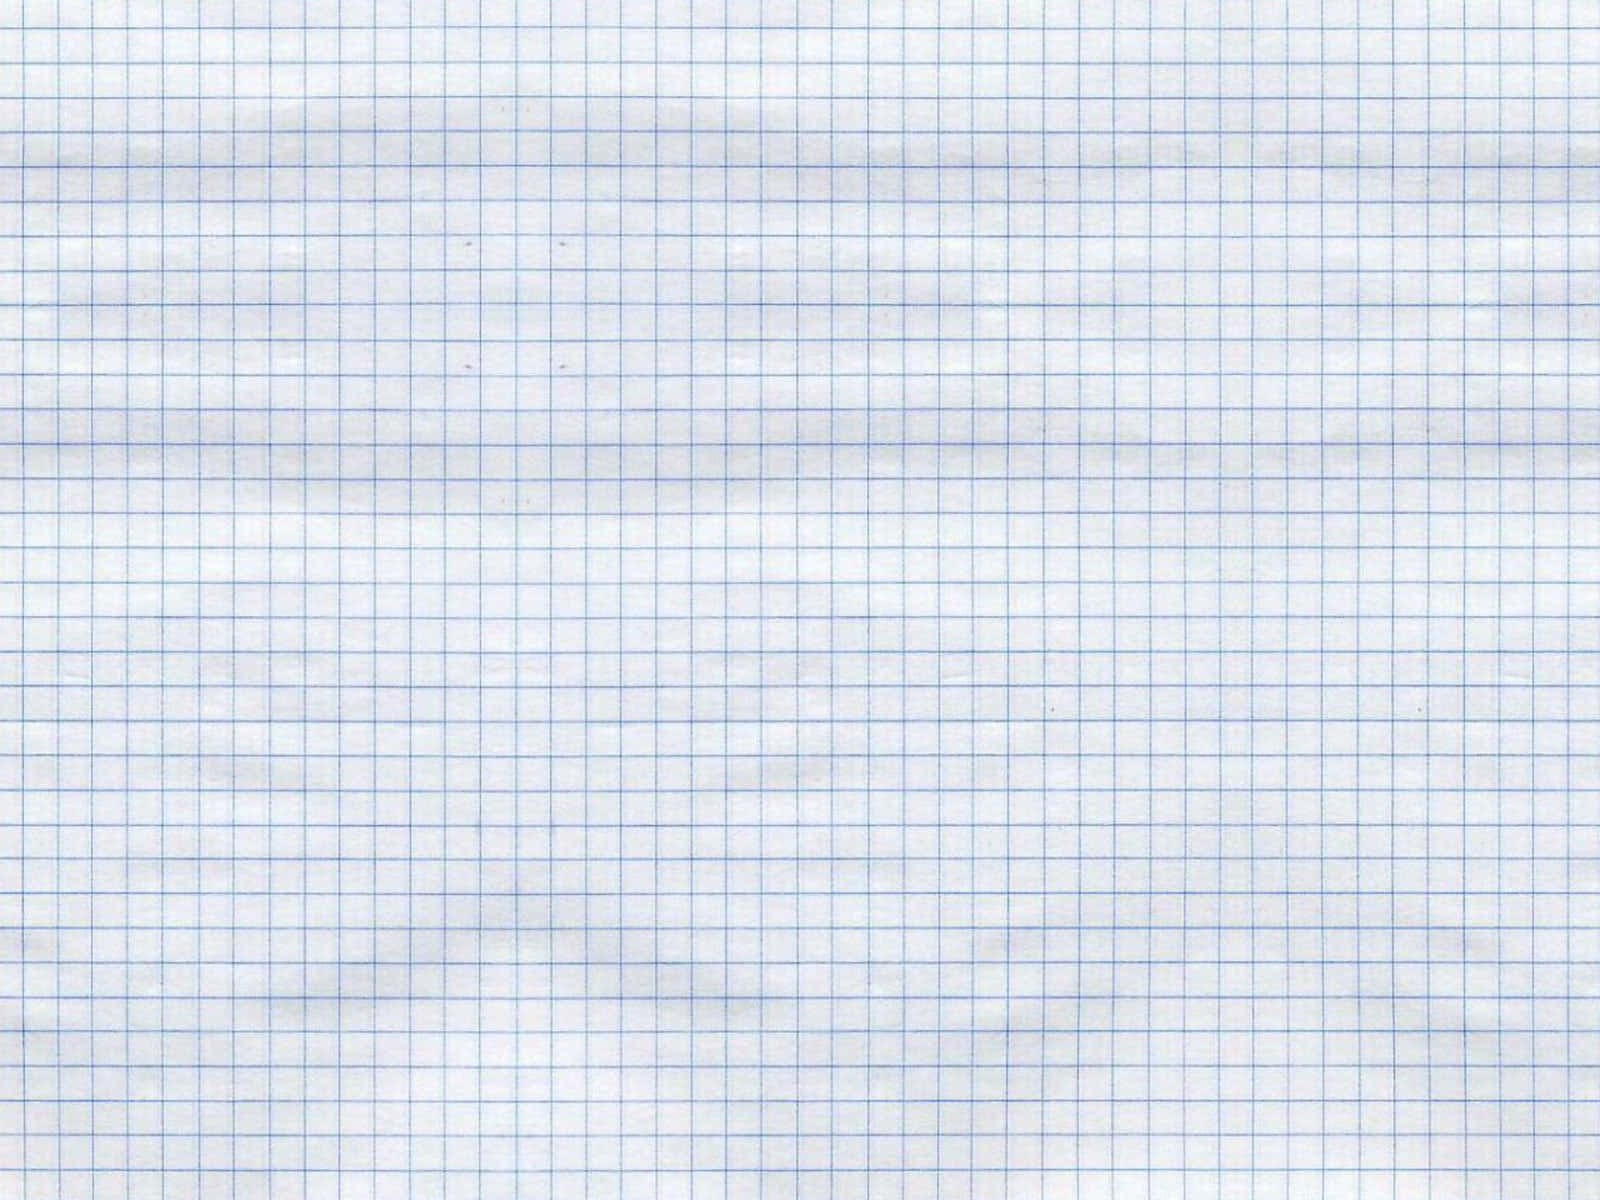 Blank Graph Paper Texture